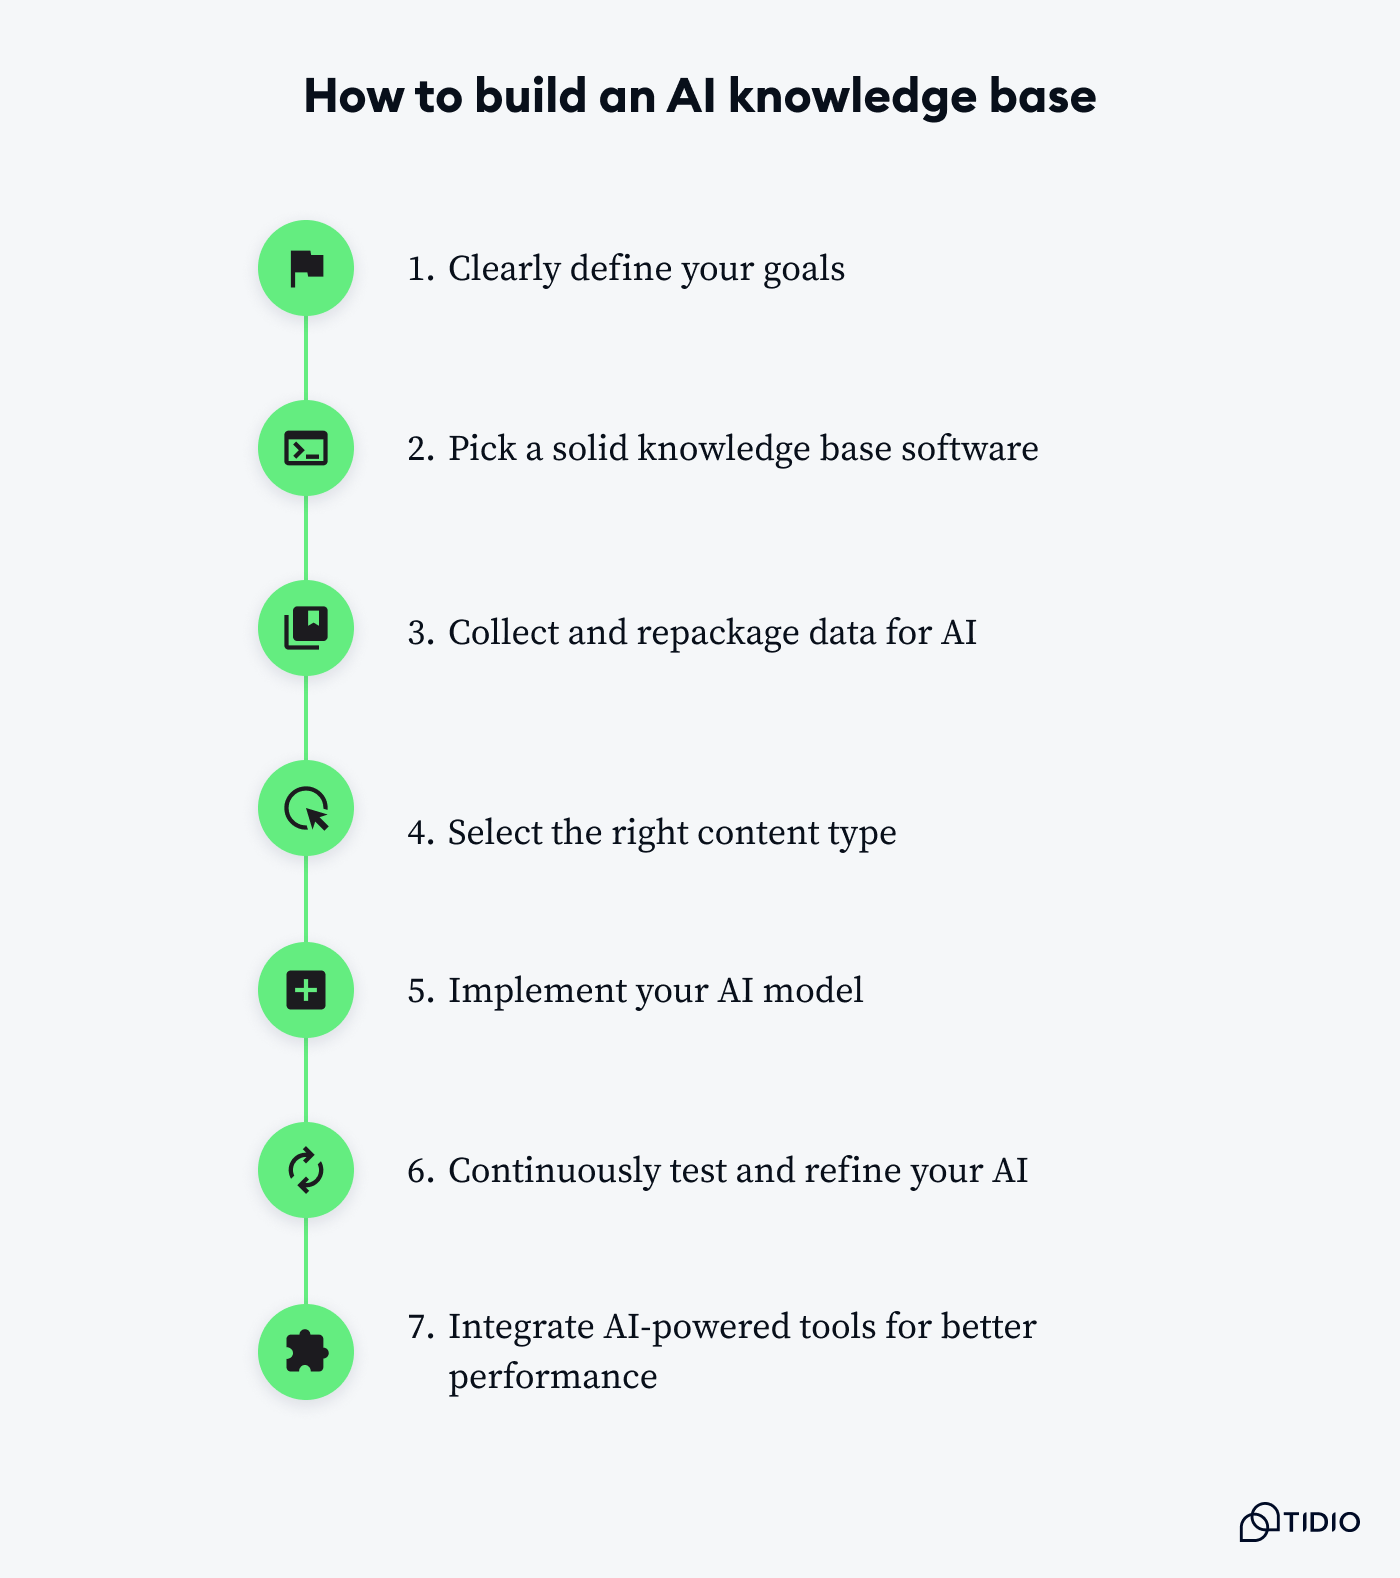 How to build an AI knowledge base listed on image